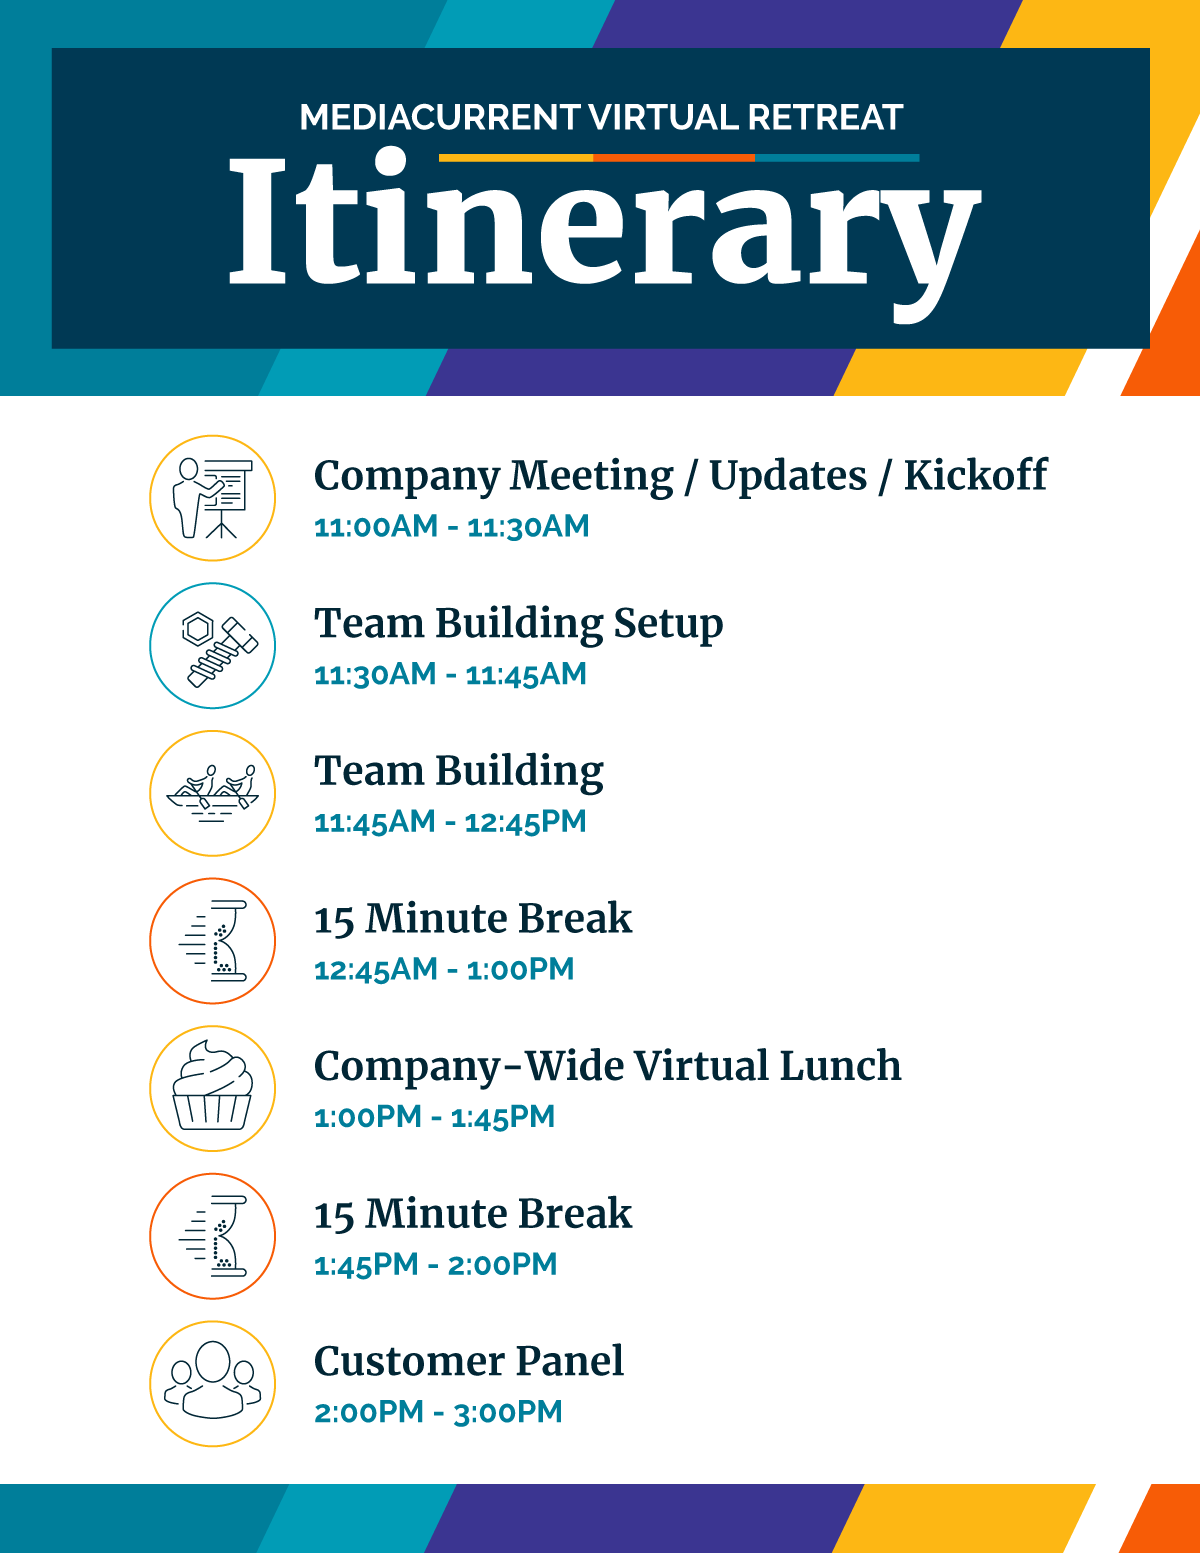 itinerary for a virtual retreat, 4 hour time block including company updates, team building activities, and a customer panel.